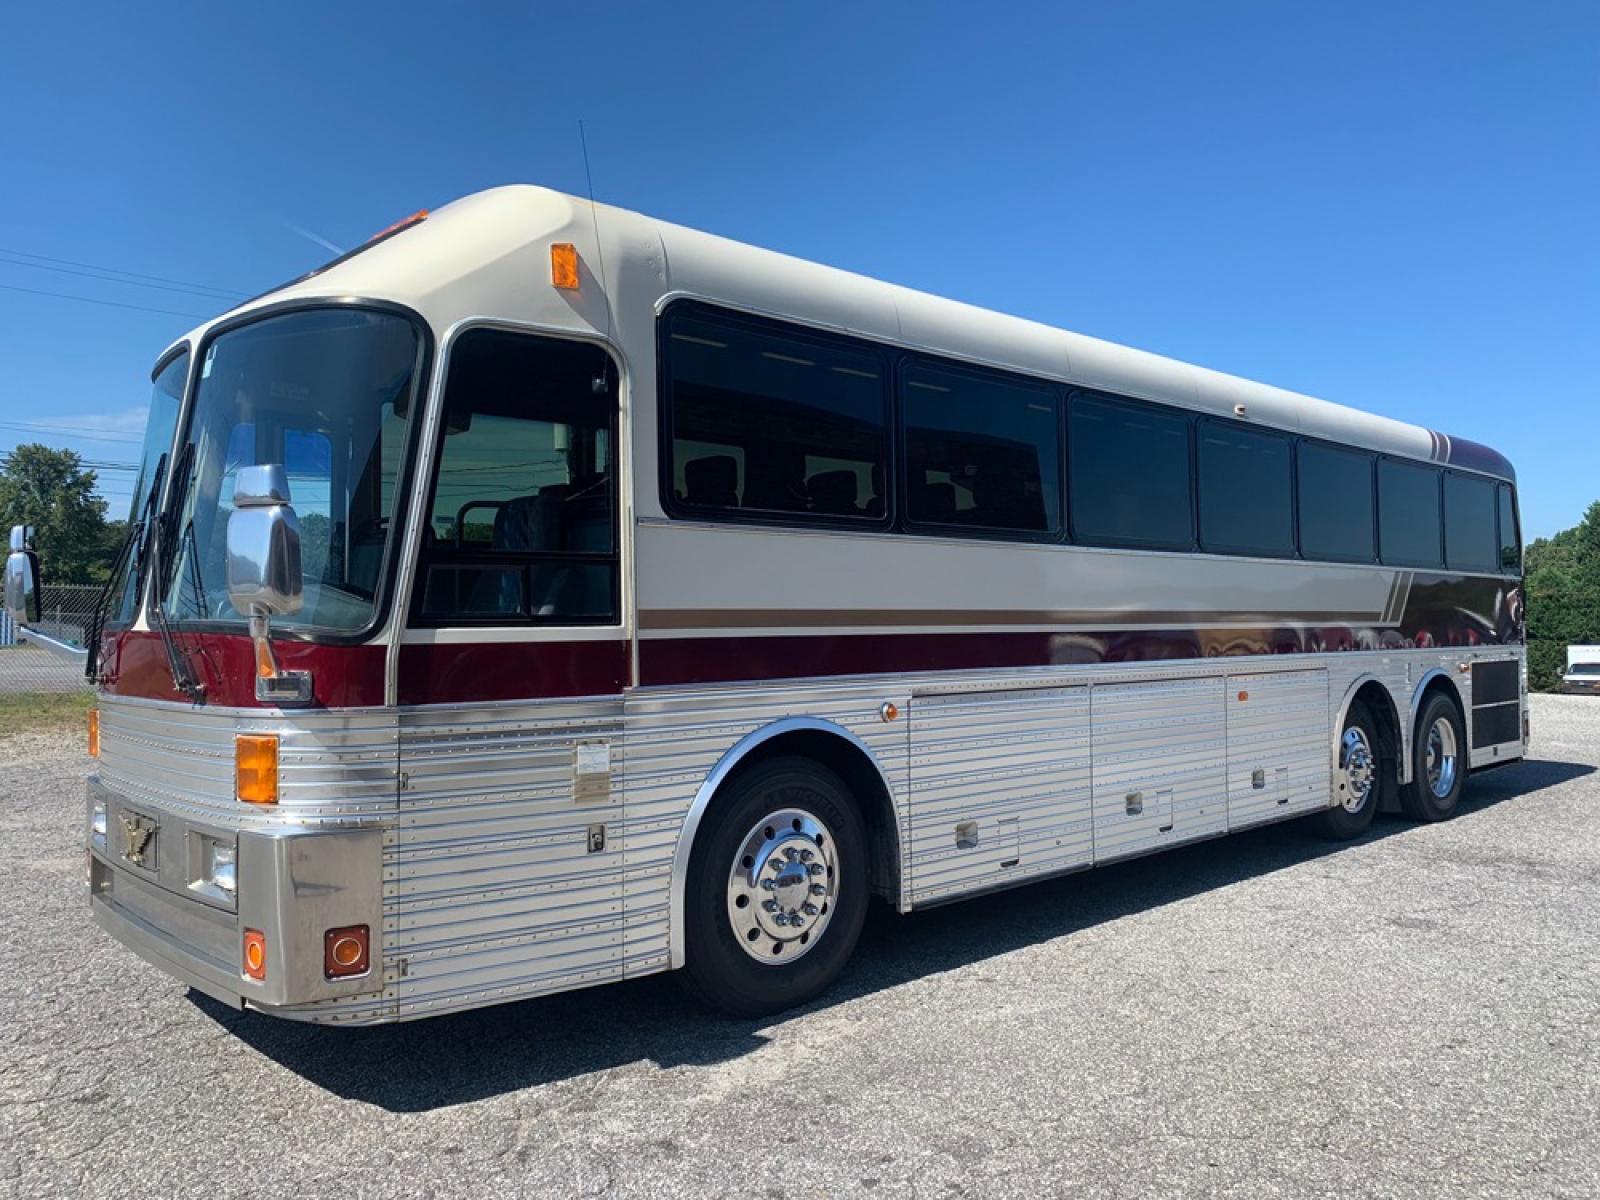 1996 White Eagle 15 Series with an Detroit Diesel Series 60 engine, Allison transmission, 0.000000, 0.000000 - 1996 EAGLE 15 Series 40’- 60 Detroit Diesel Engine, - Allison Automatic Transmission - 46 Passengers - Electric Wipers - Electric Mirrors - Alloy Wheels - 4 Monitors & DVD - Enclosed Overhead Racks – Restroom - Photo #6